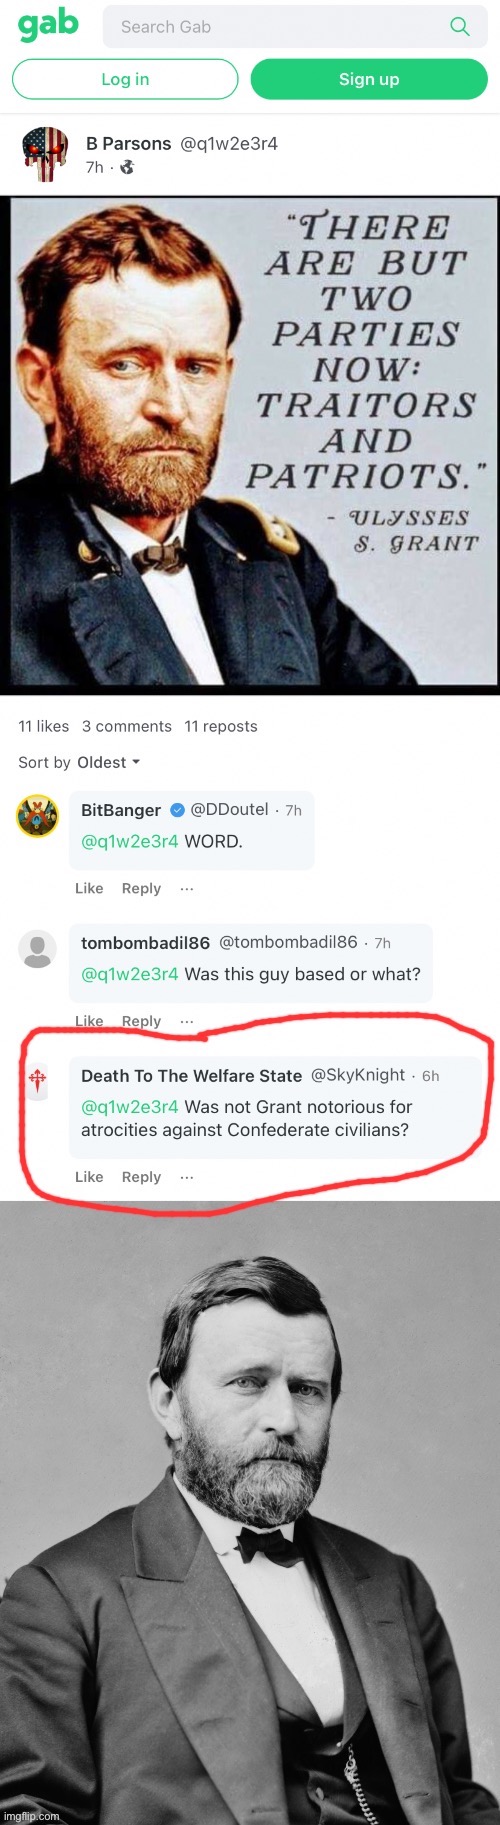 I think they may have their history a bit backwards here | image tagged in gab civil war,historical meme,social media,civil war,conservative logic,hmmm | made w/ Imgflip meme maker